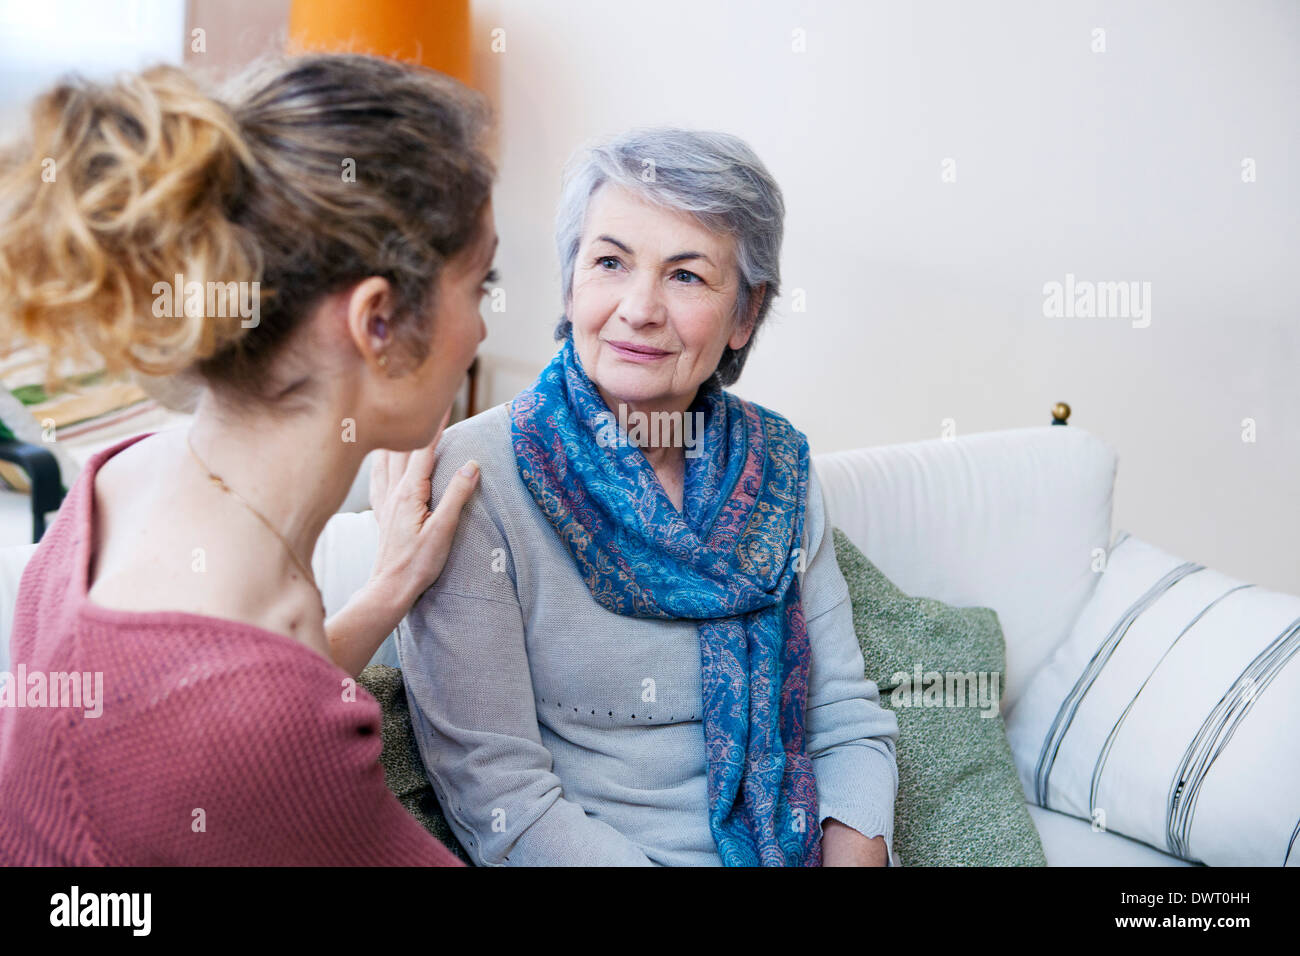 Social aid for elderly person Stock Photo